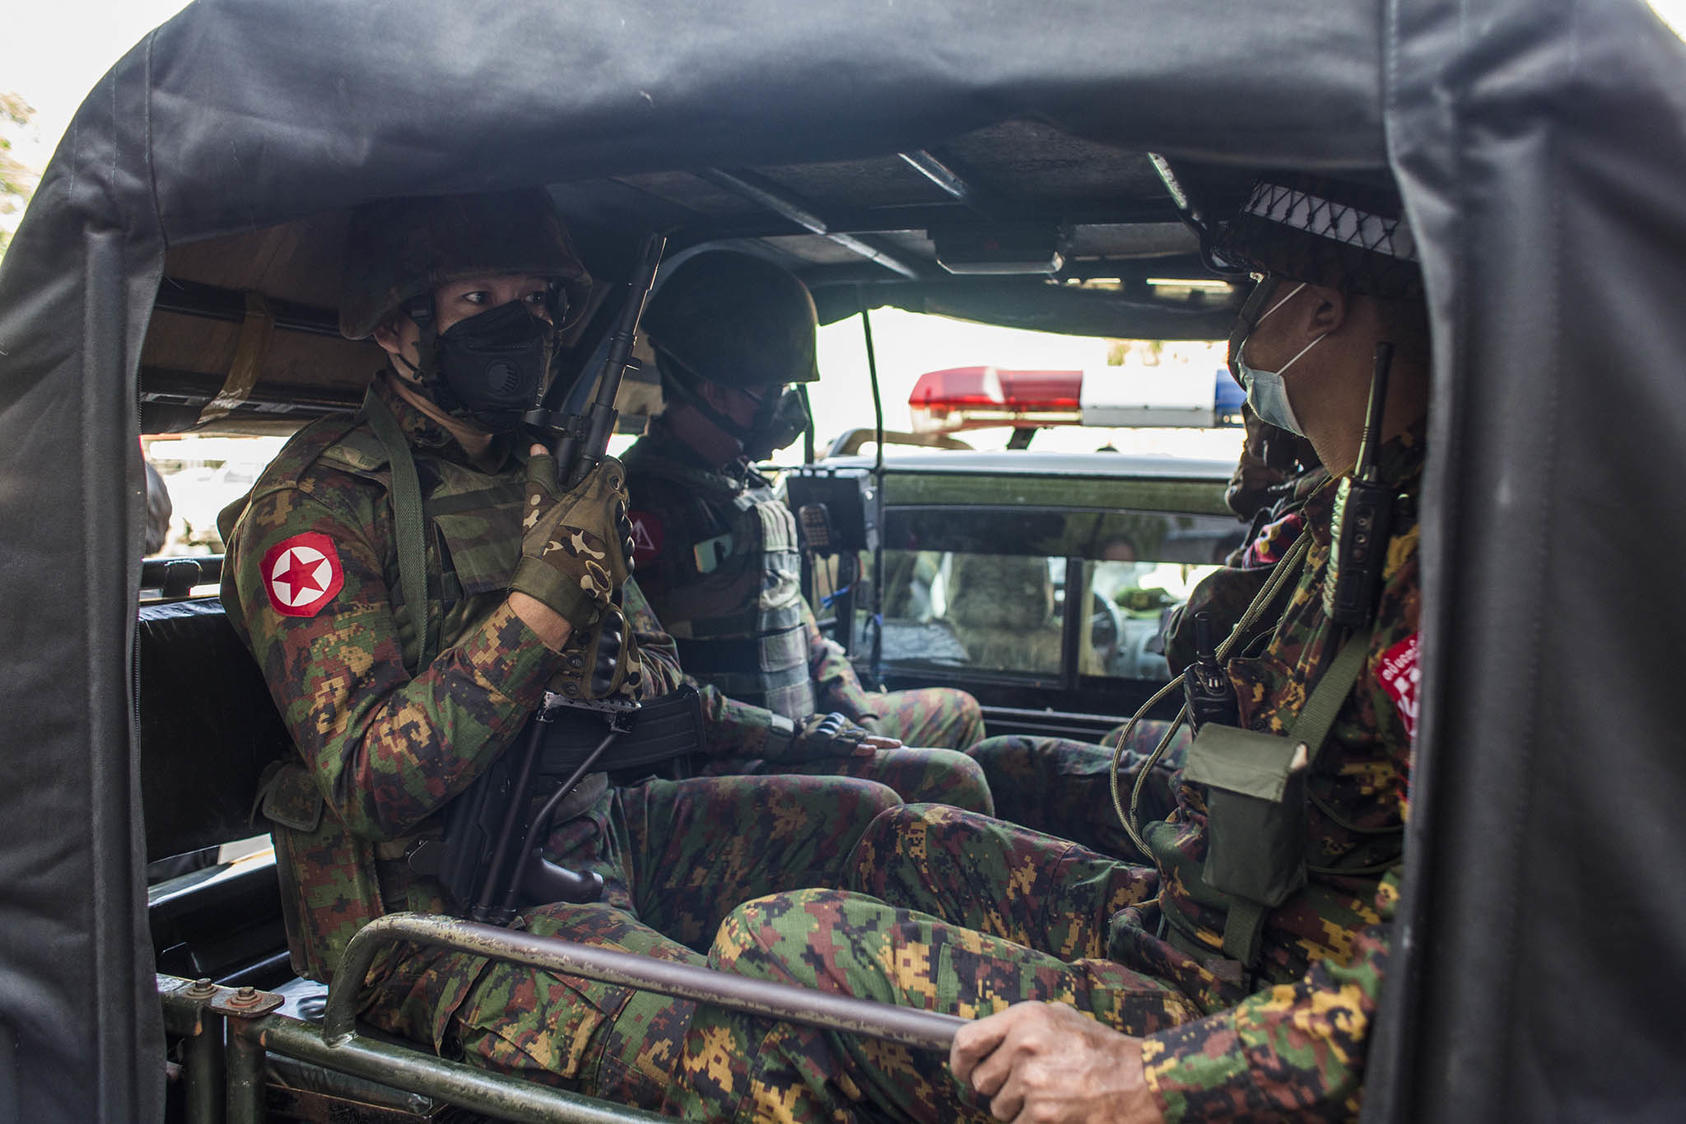 Soldiers in a truck on the streets of Yangon, Myanmar, Tuesday, Feb. 2, 2021. Beijing has begun to hedge its support for the military junta as its position grows weaker and Western support for the opposition grows. (The New York Times)